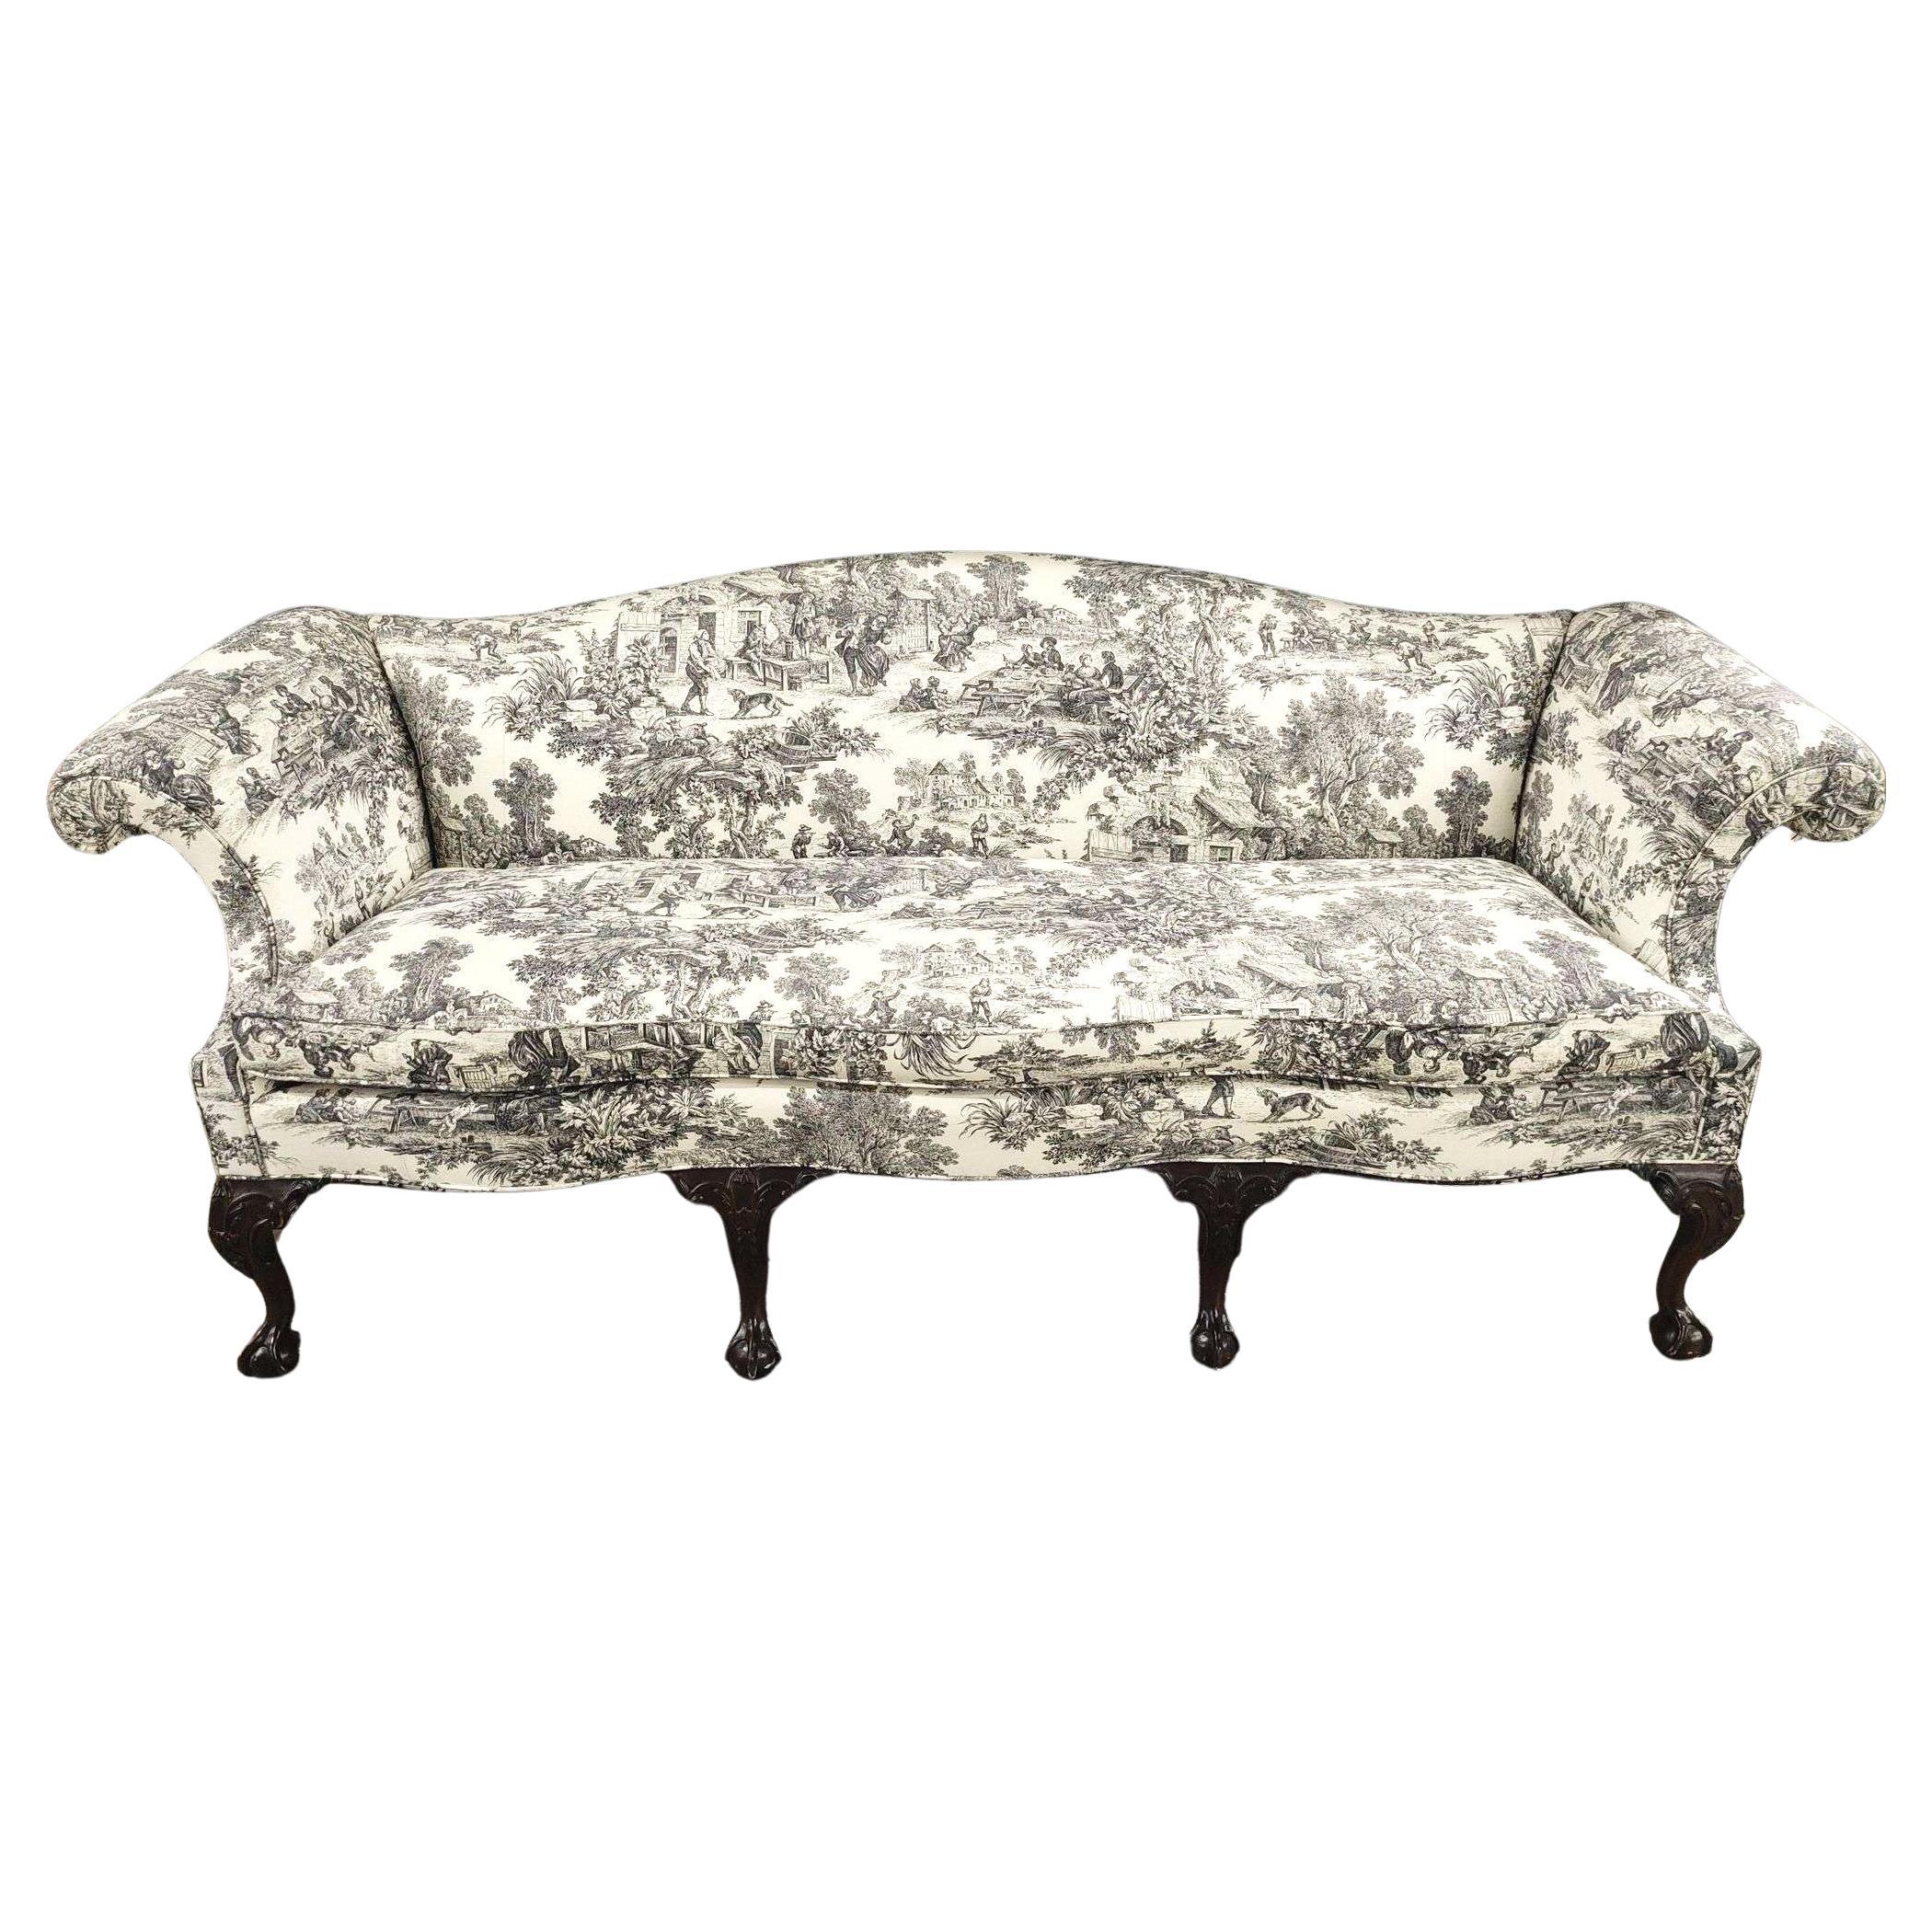 Williamsburg Chippendale Style Toile Camelback Settee Sofa by Stickley For Sale